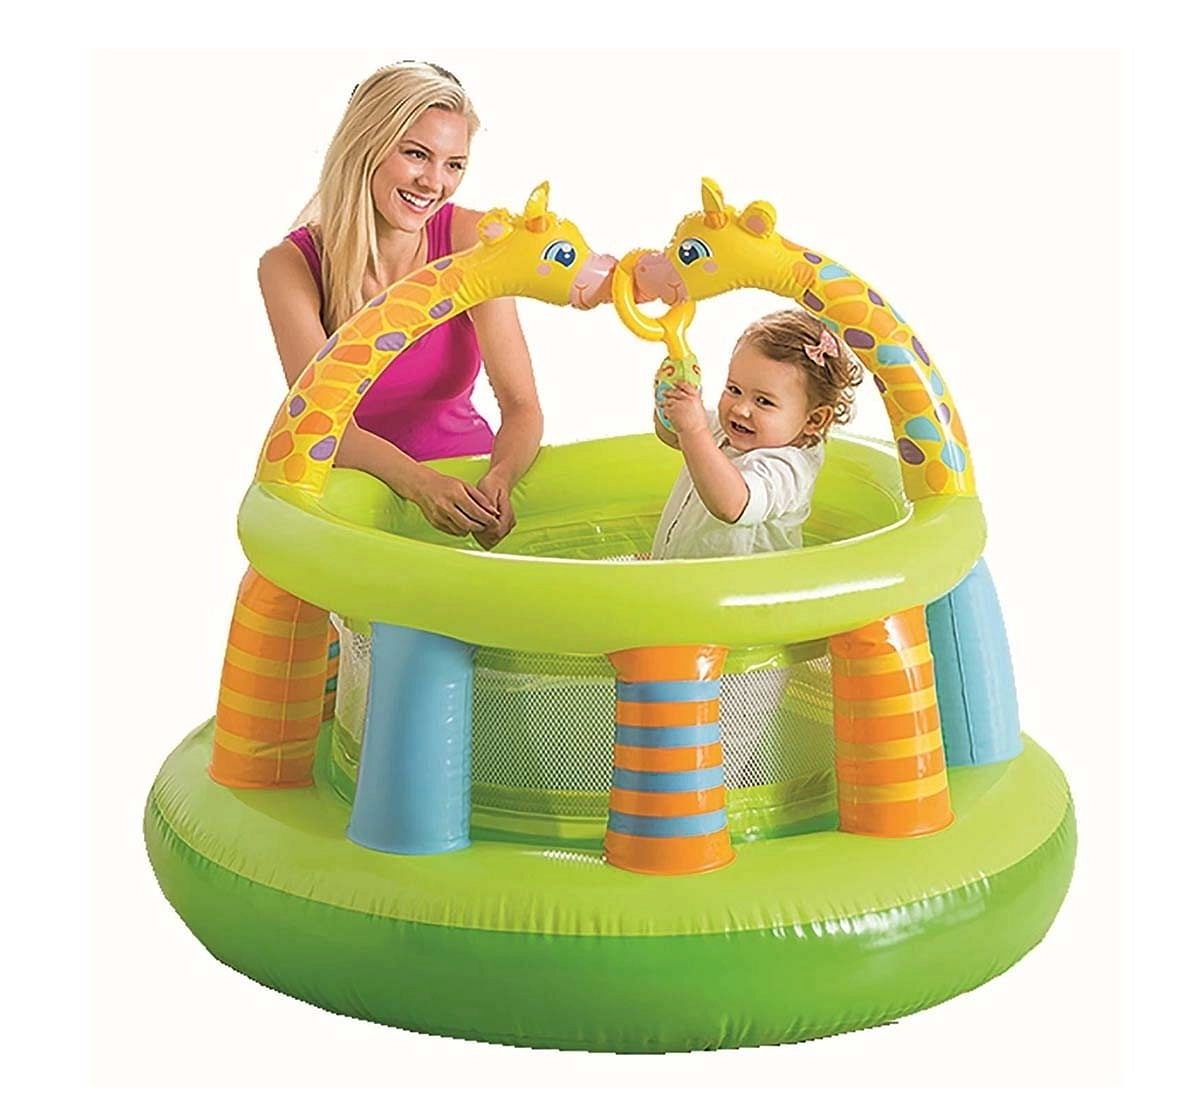 Intex Inflatable Soft Sides My First Gym Baby Gear for Kids Age 3Y+